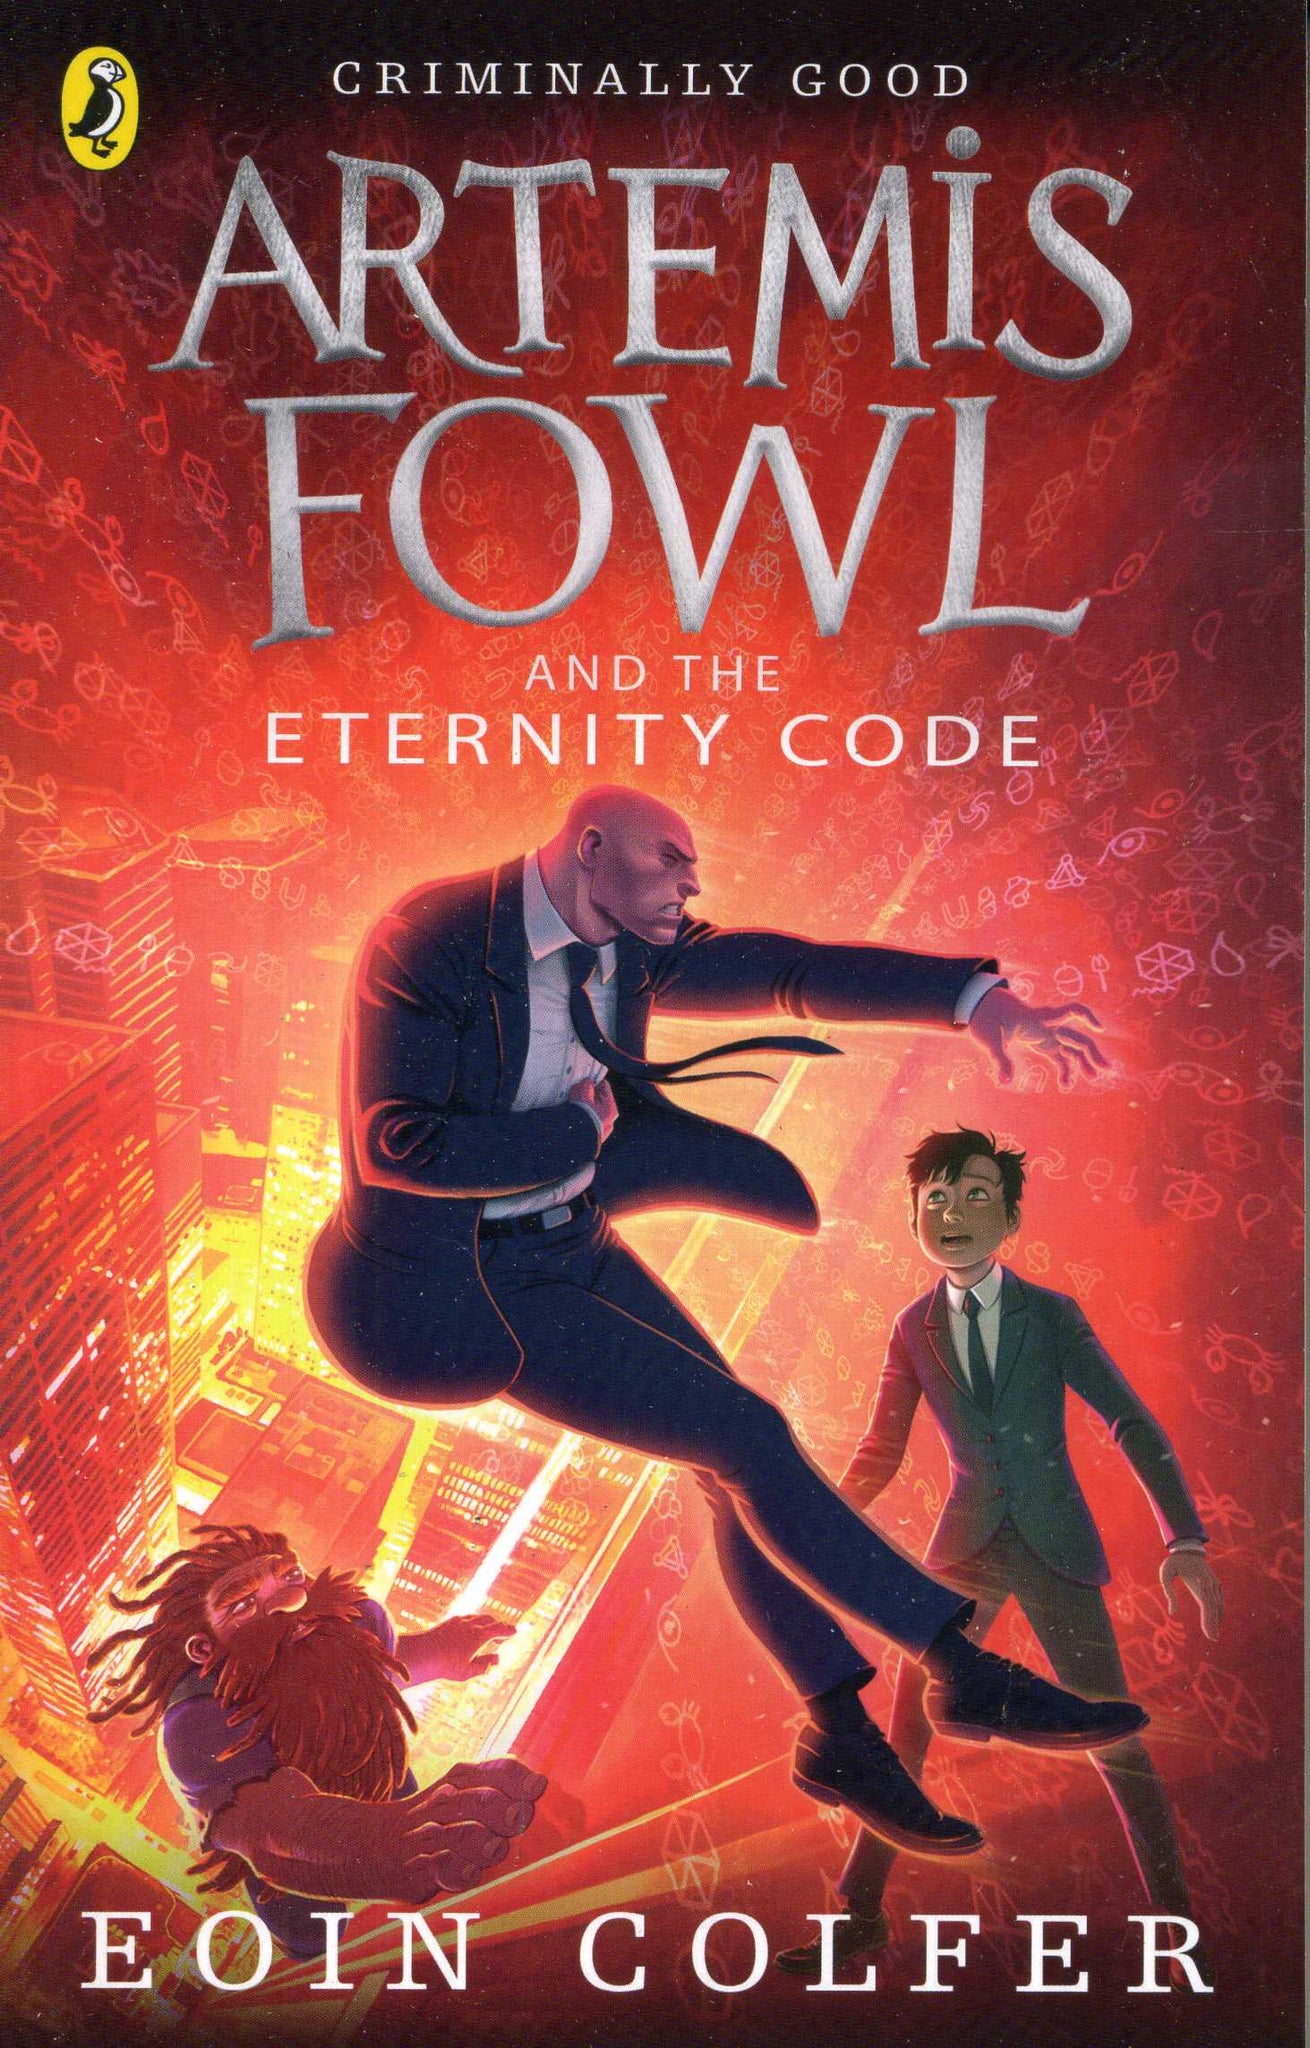 ARTEMIS FOWL AND THE ETERINITY CODE